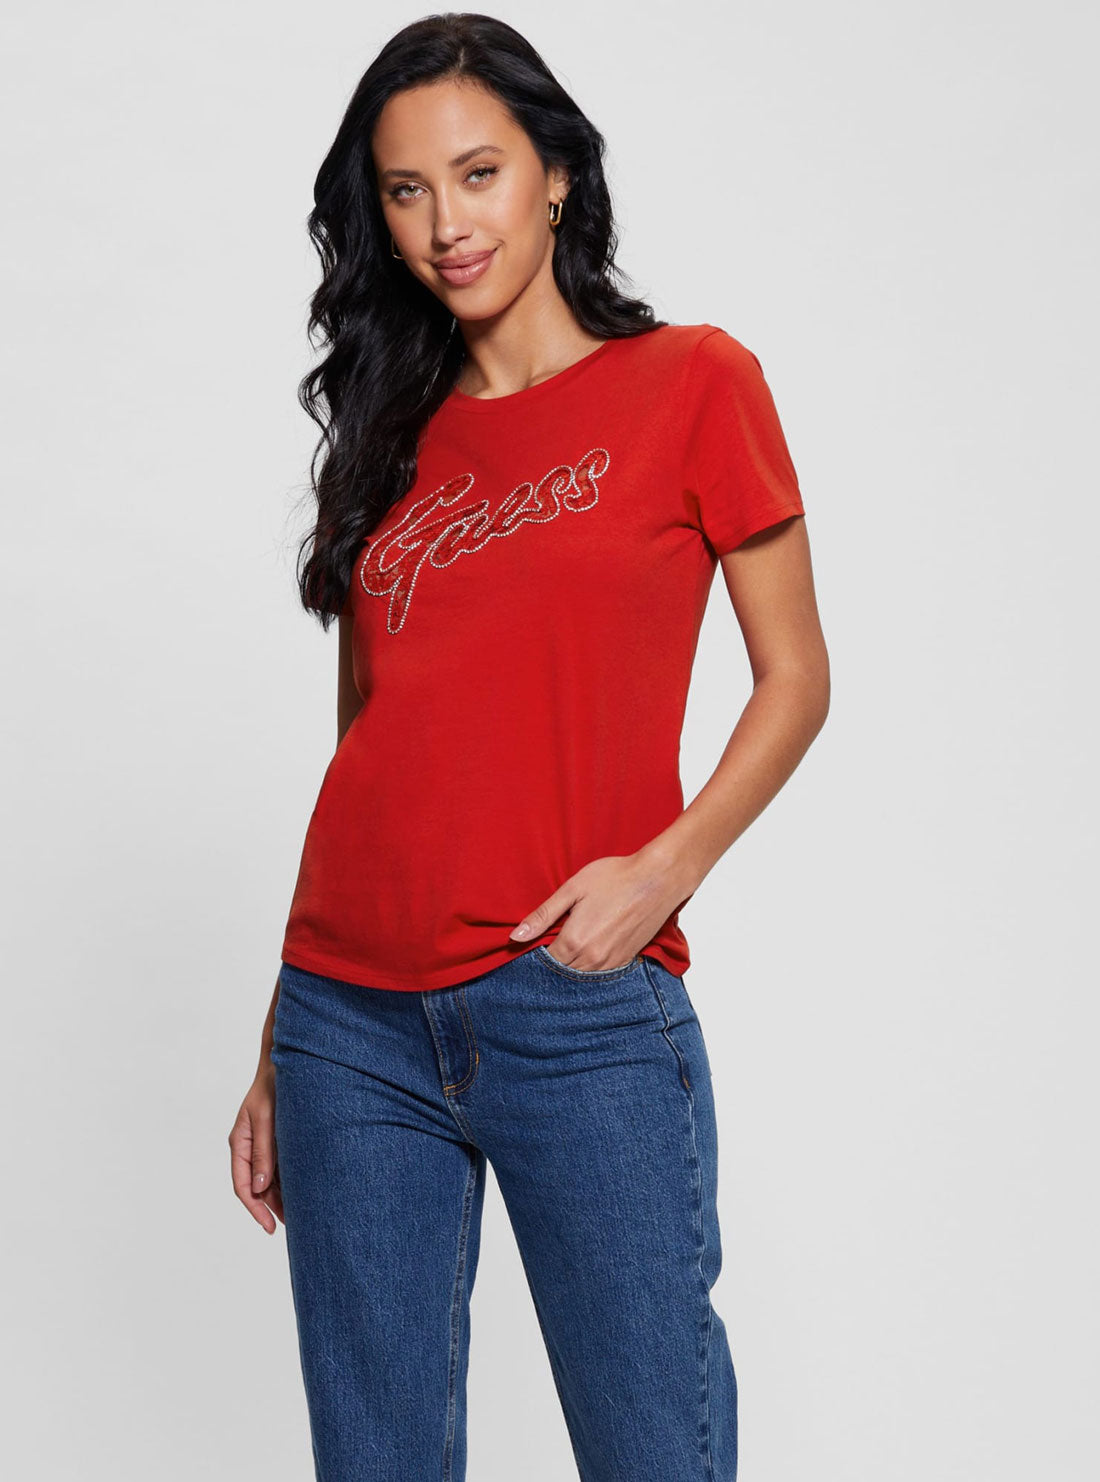 GUESS Red Short Sleeve Lace Logo T-Shirt front view